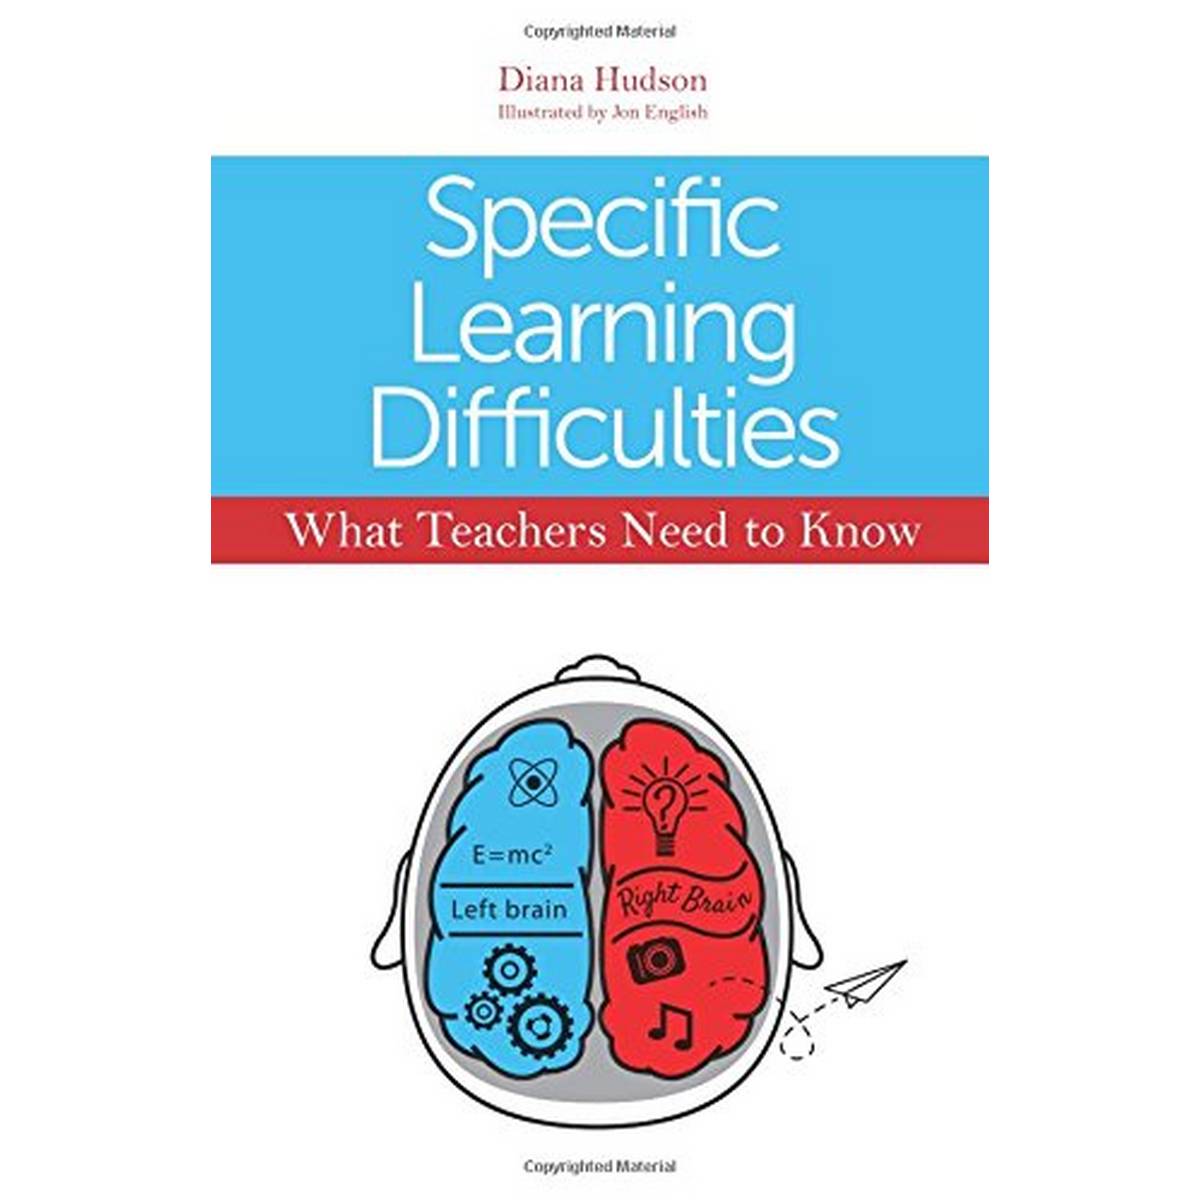 Specific Learning Difficulties - What Teachers Need to Know